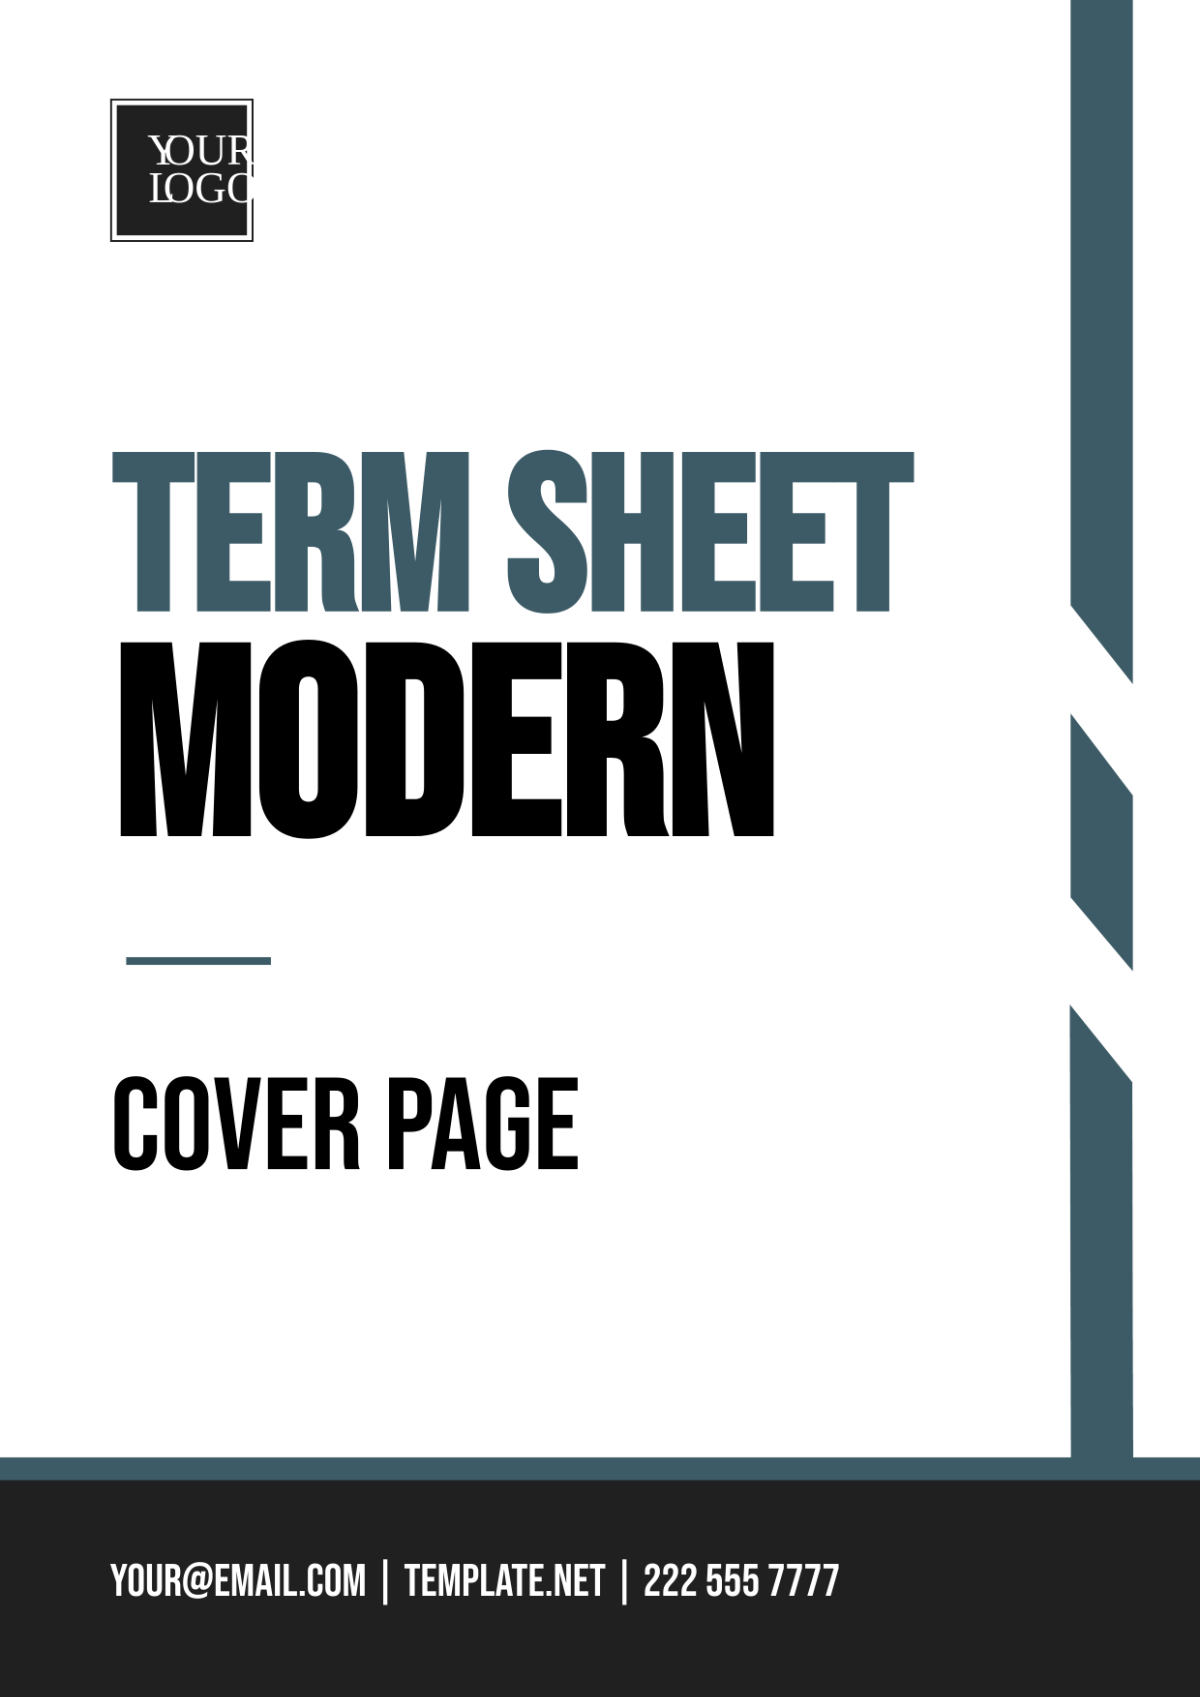 Term Sheet Modern Cover Page Template